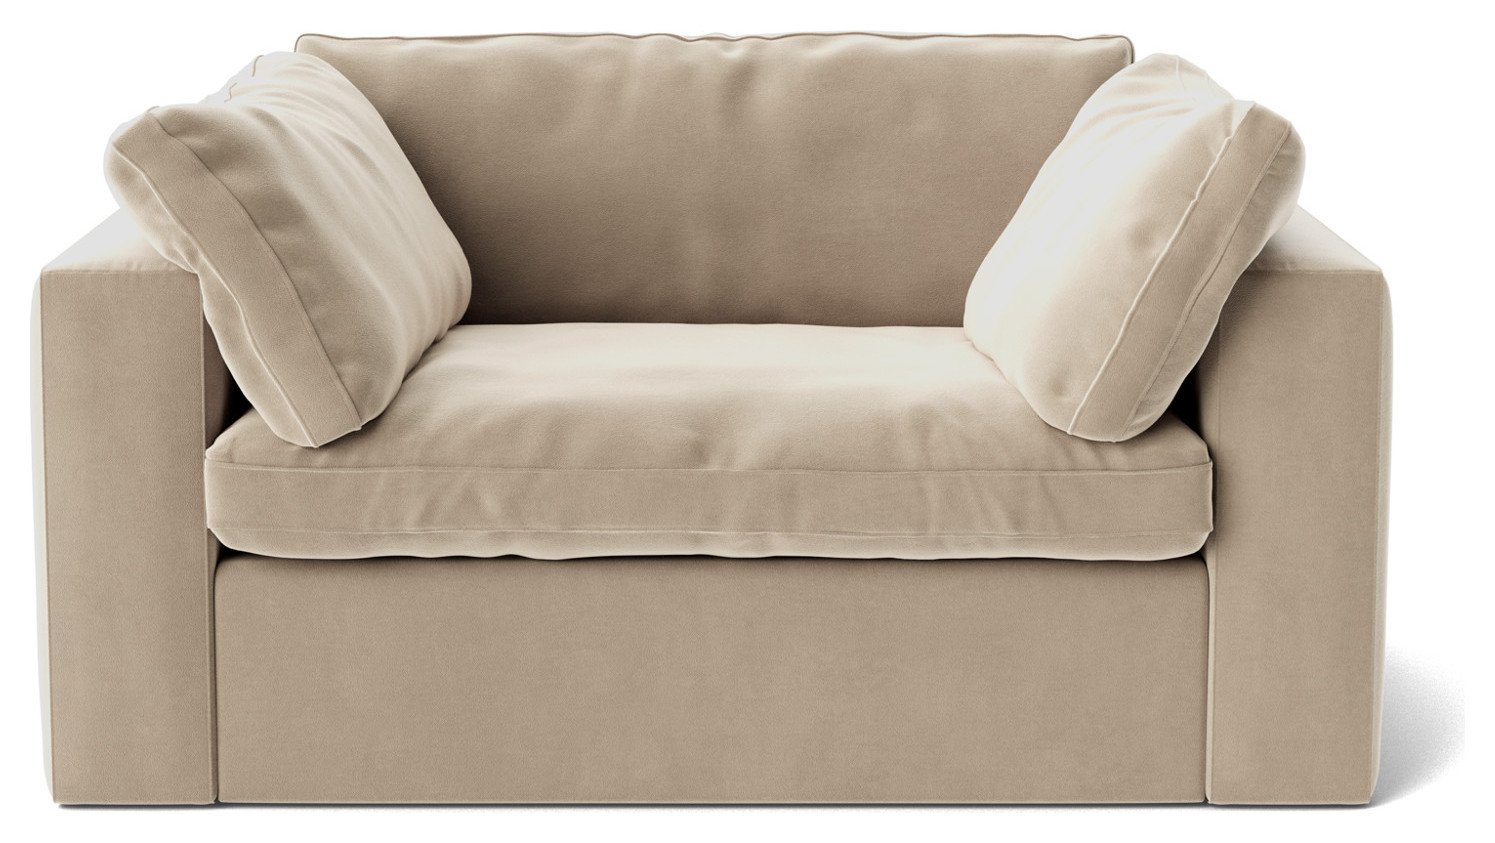 Swoon Seattle Velvet Cuddle Chair - Taupe